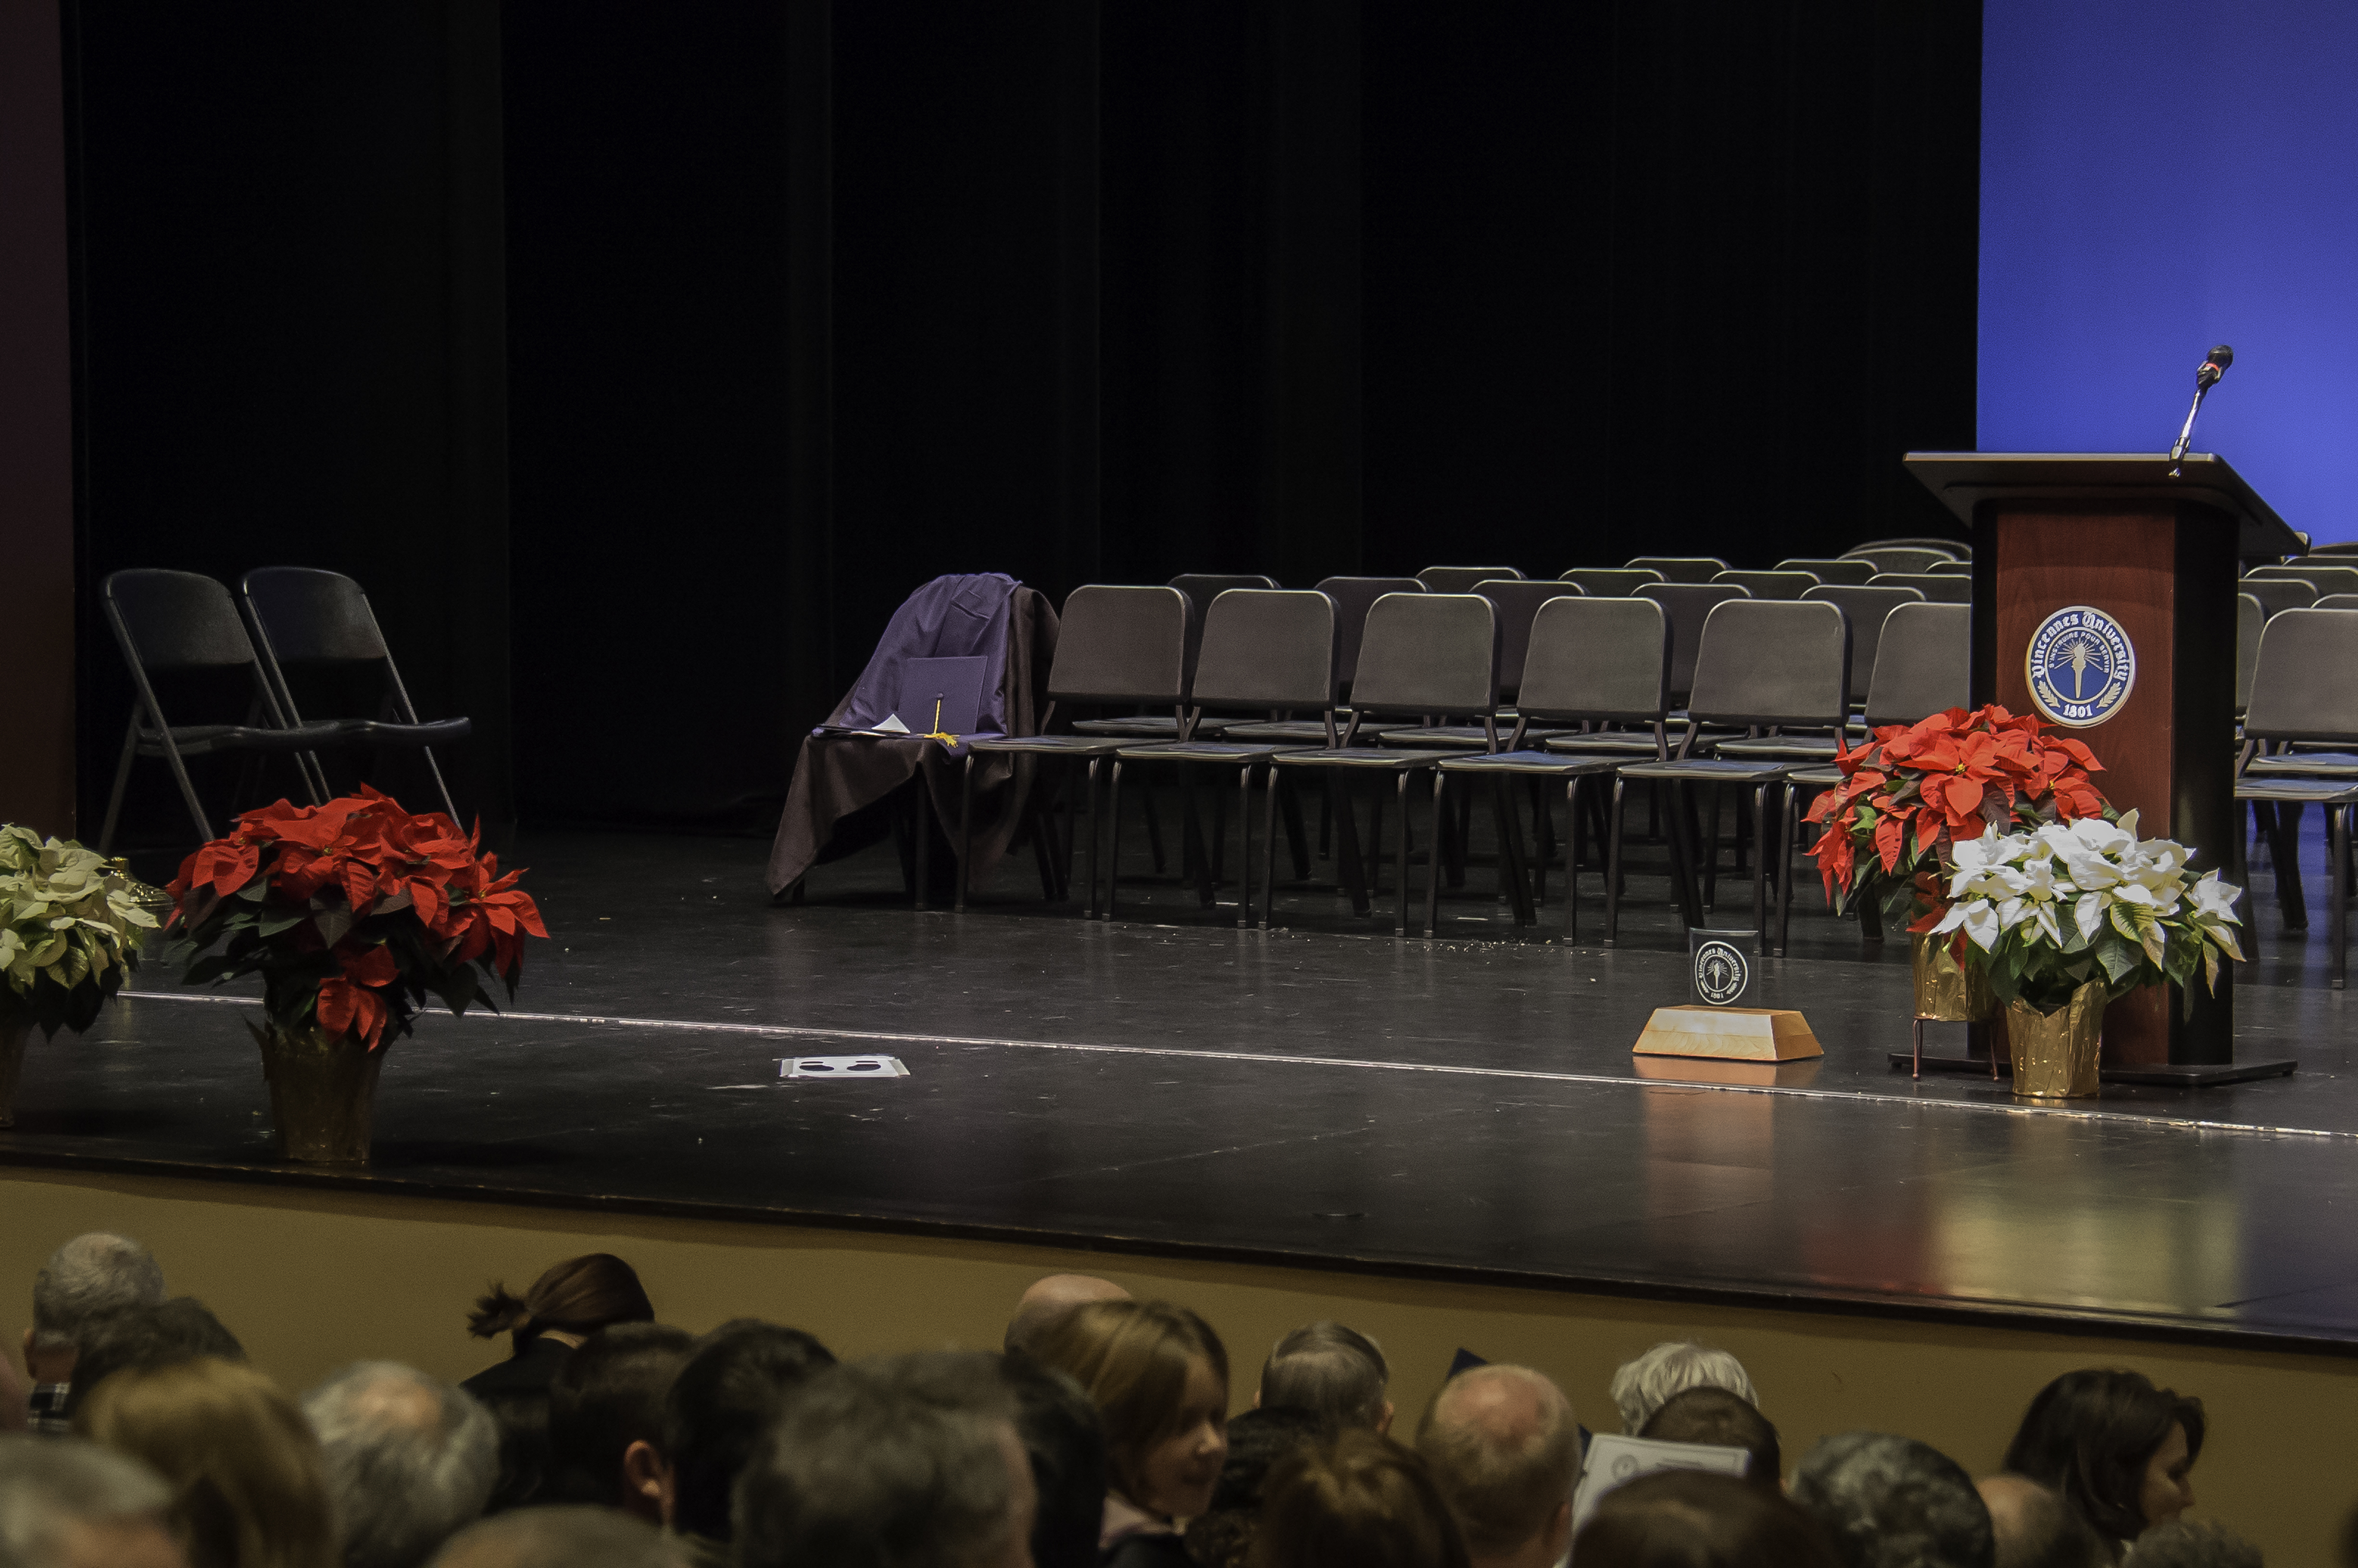 Chairs, poinsettias, and a podium on the Red Skelton Performing Arts Center stage. A cap and gown are on one of the chairs. Male and female guests are sitting in the audience in front of the stage.